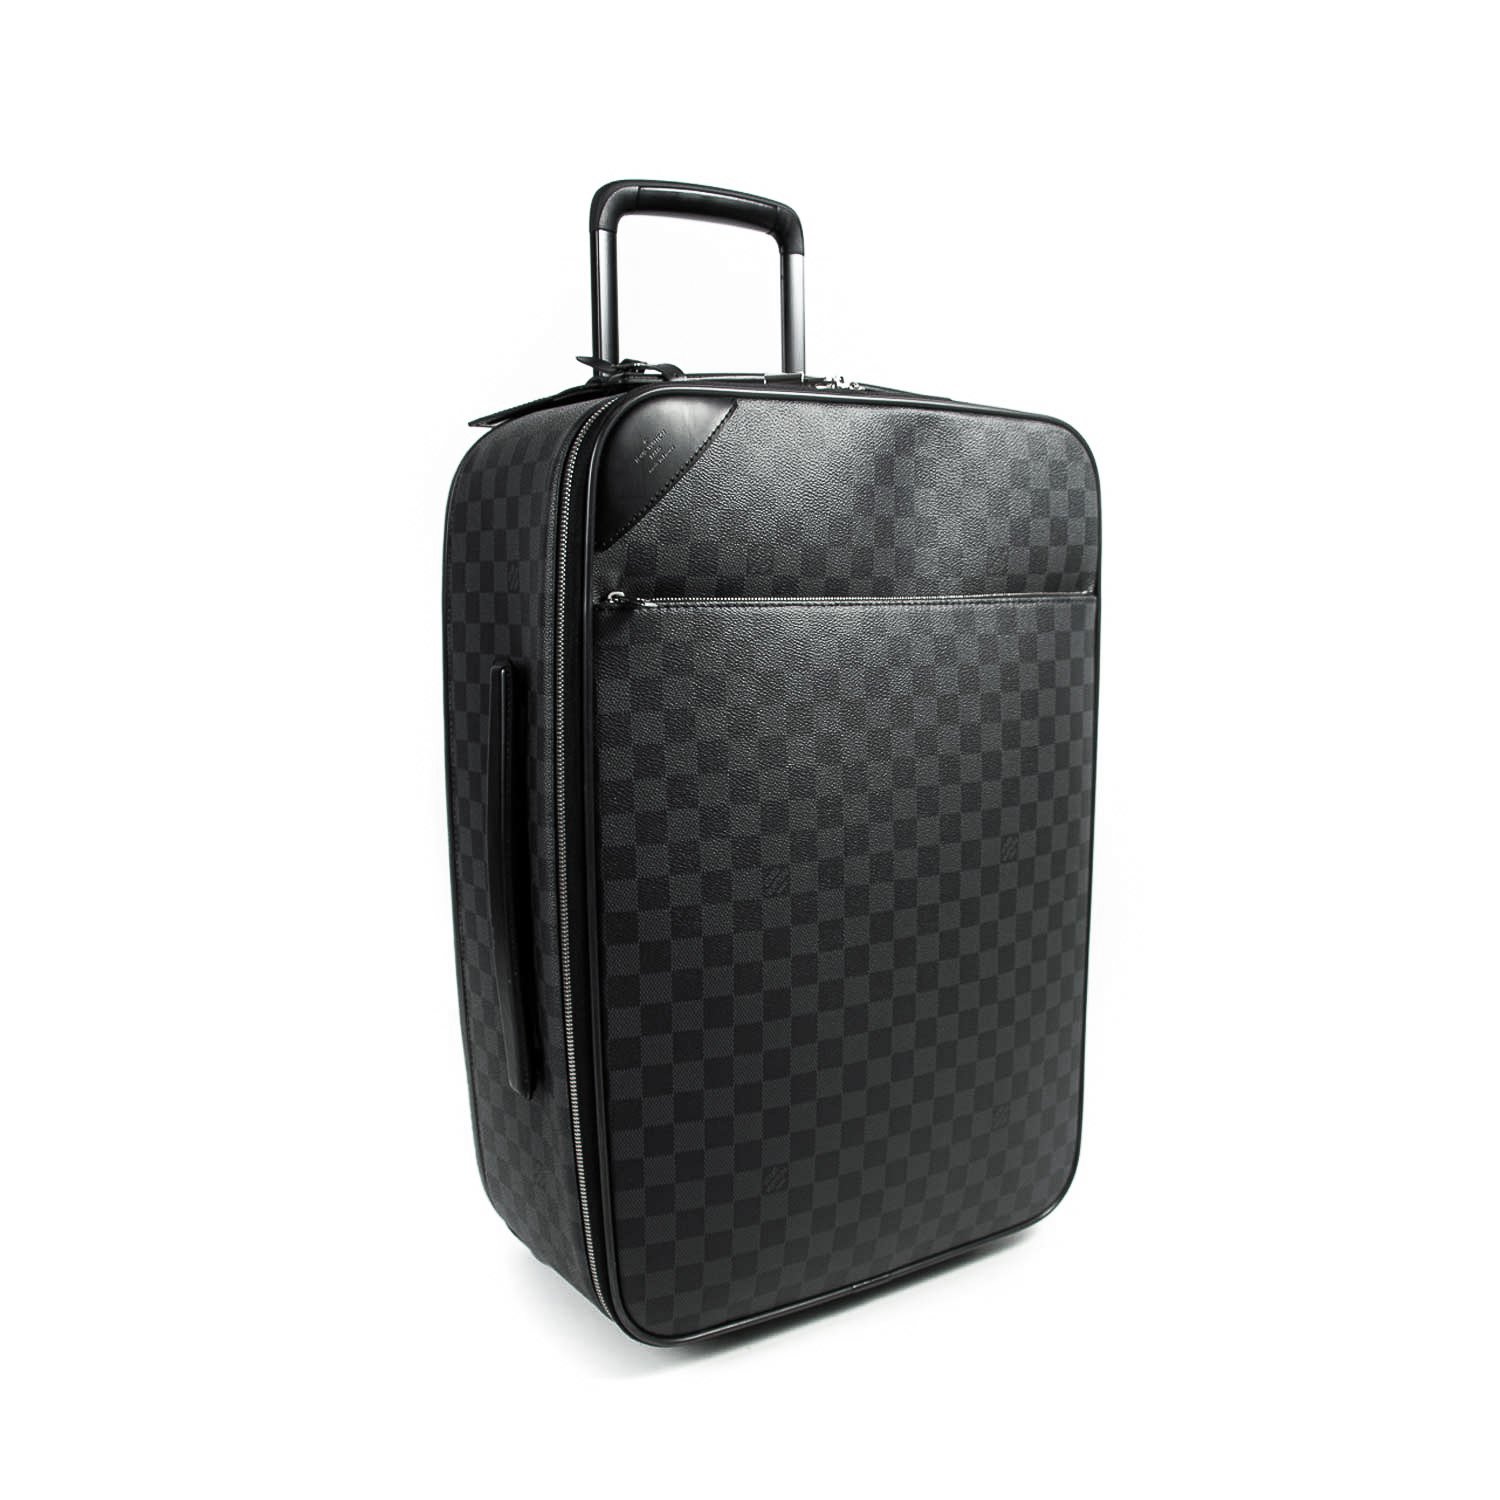 2X Luggage Suitcase Replacement Wheels For Louis Vuitton Pegase 55, 60, 65  Only on Galleon Philippines